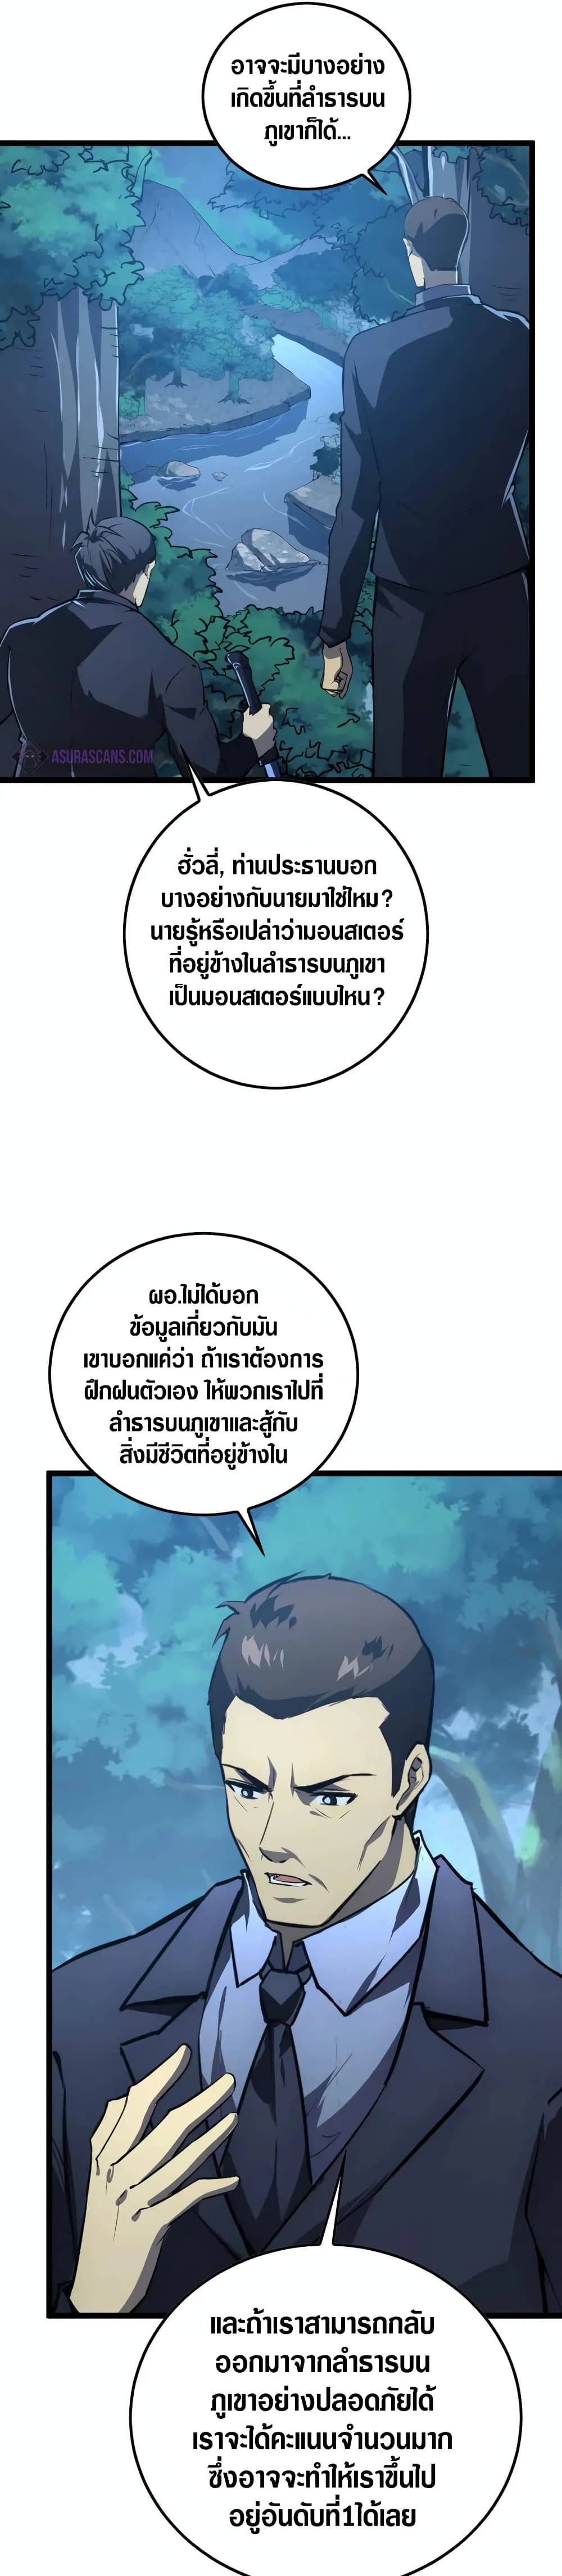 Rise From The Rubble เศษซากวันสิ้นโลก 149-149